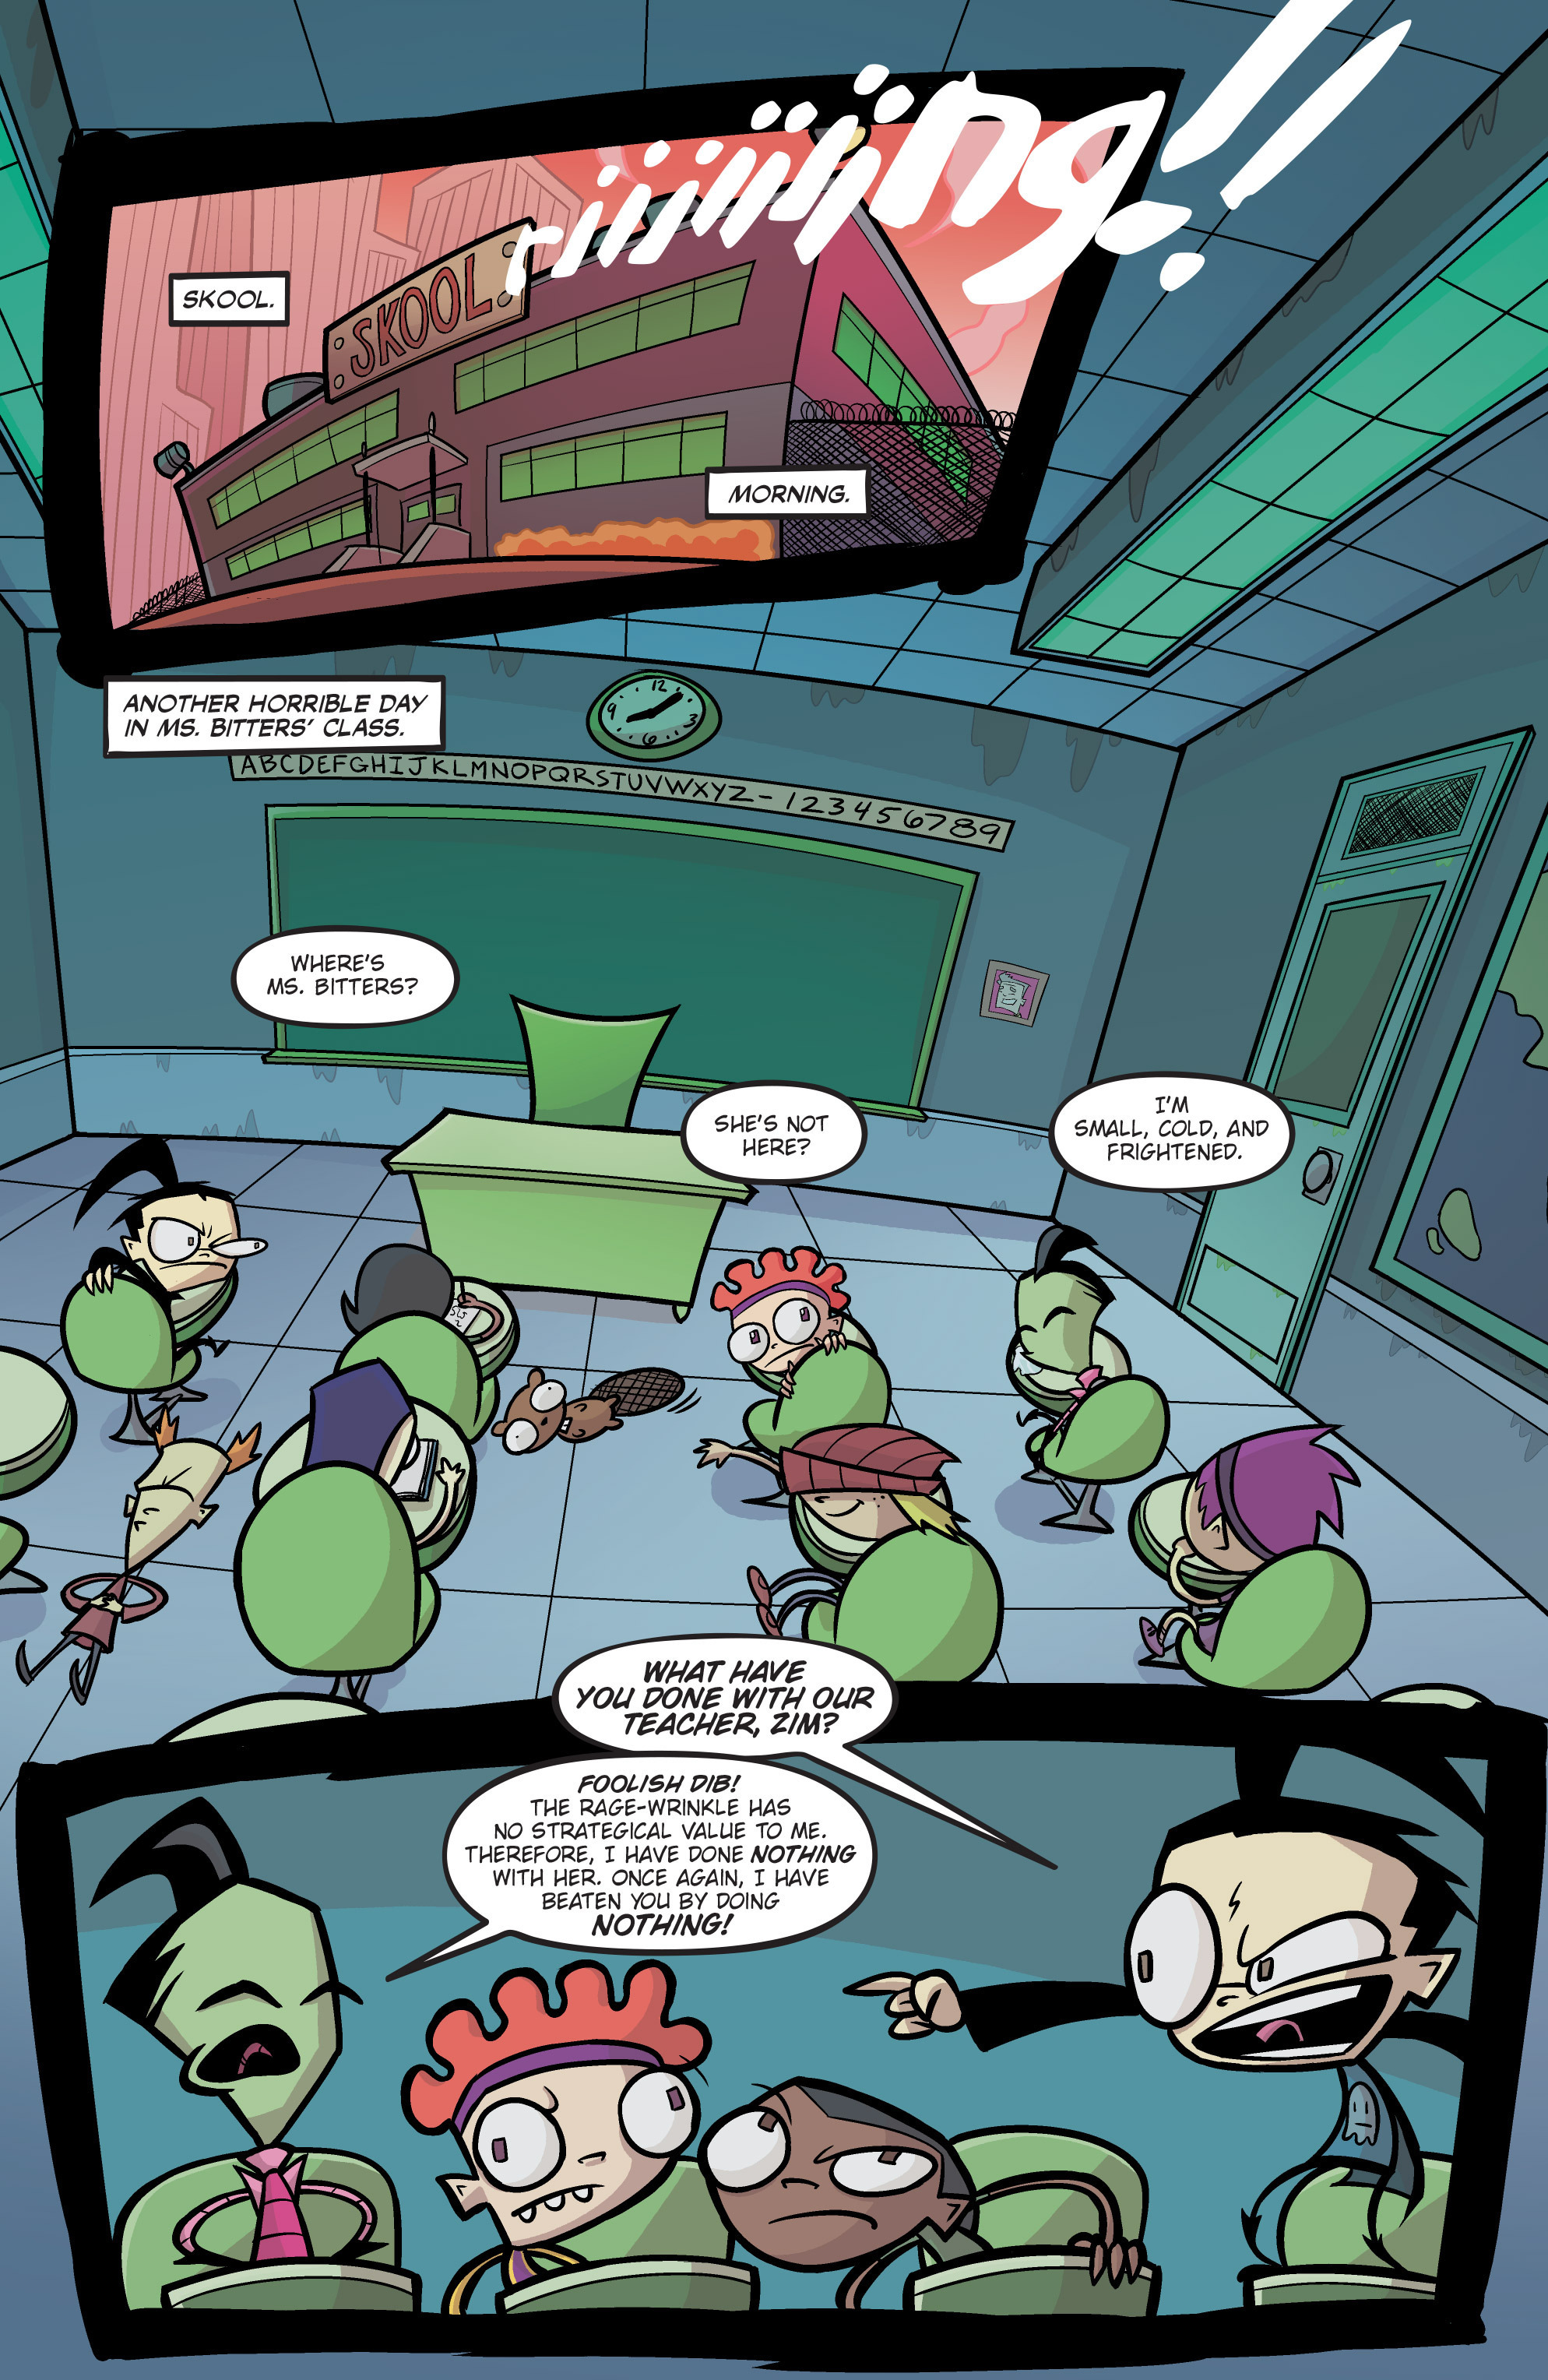 Invader Zim (2015-): Chapter 15 - Page 4